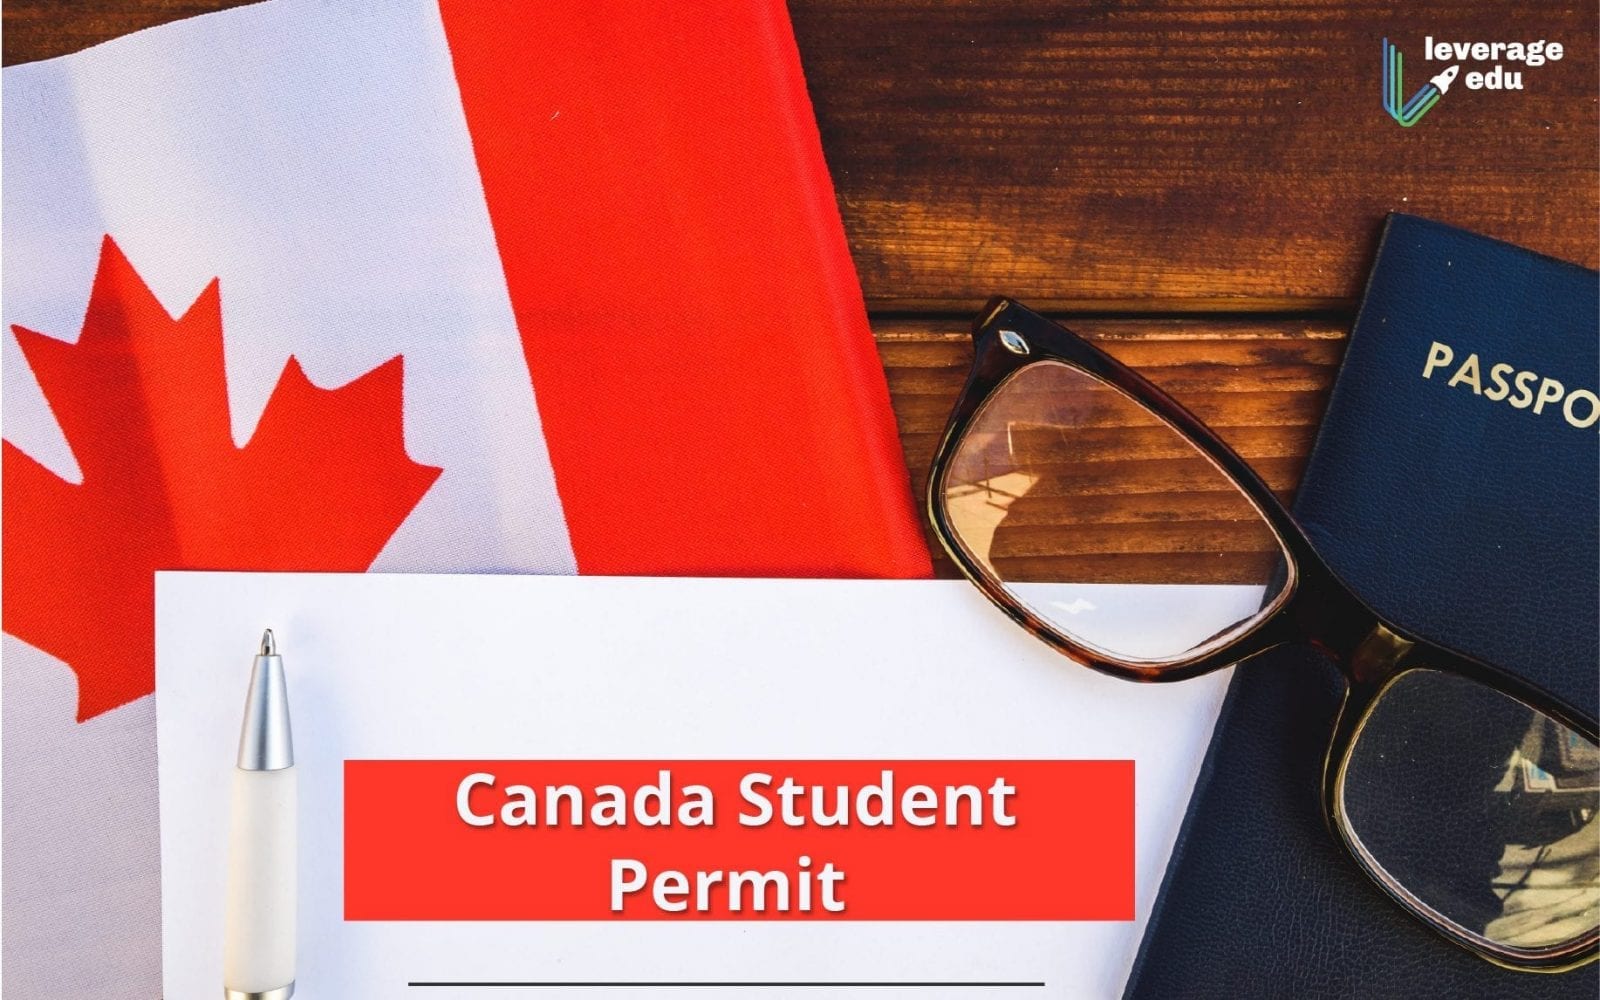 Canada Student Permit Guide 2022 Top Education News Feed in Nigeria Today